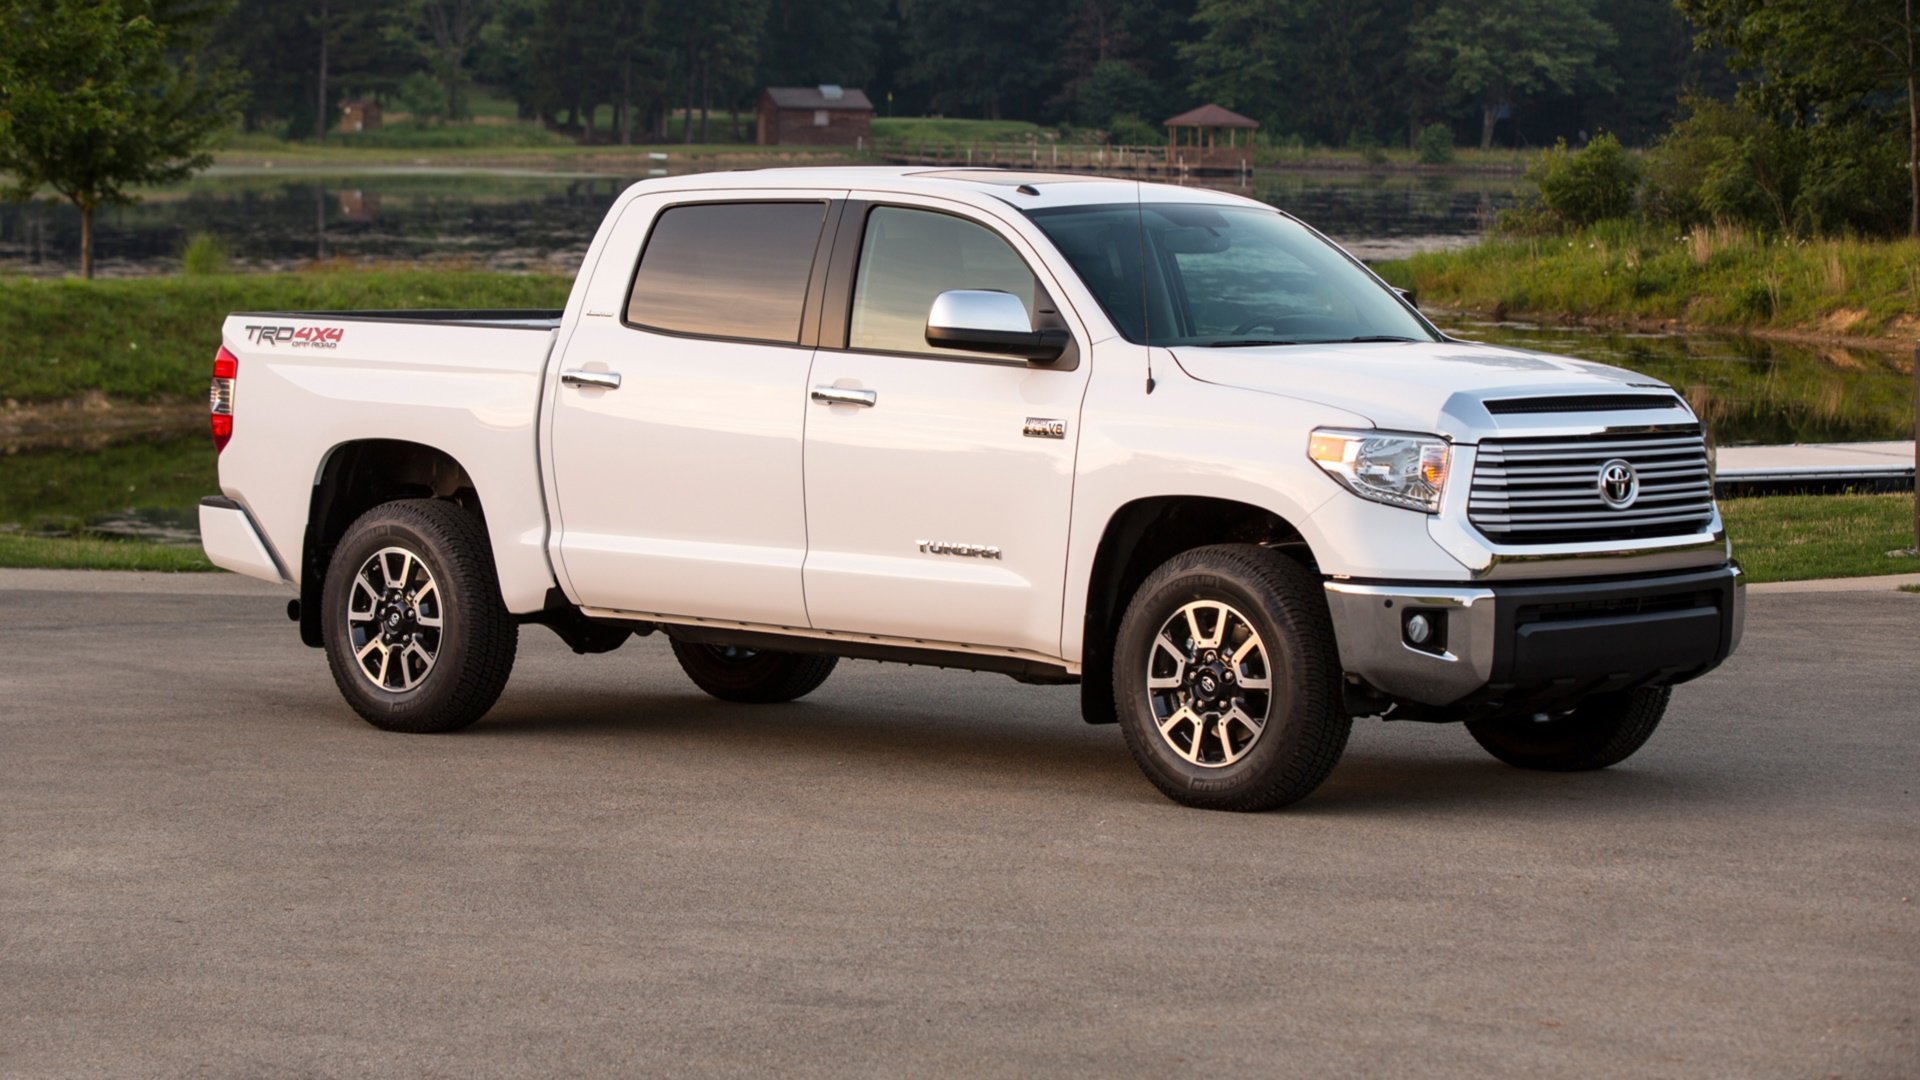 Best Toyota Tundra wallpaper ID:246607 for High Resolution full hd 1080p computer